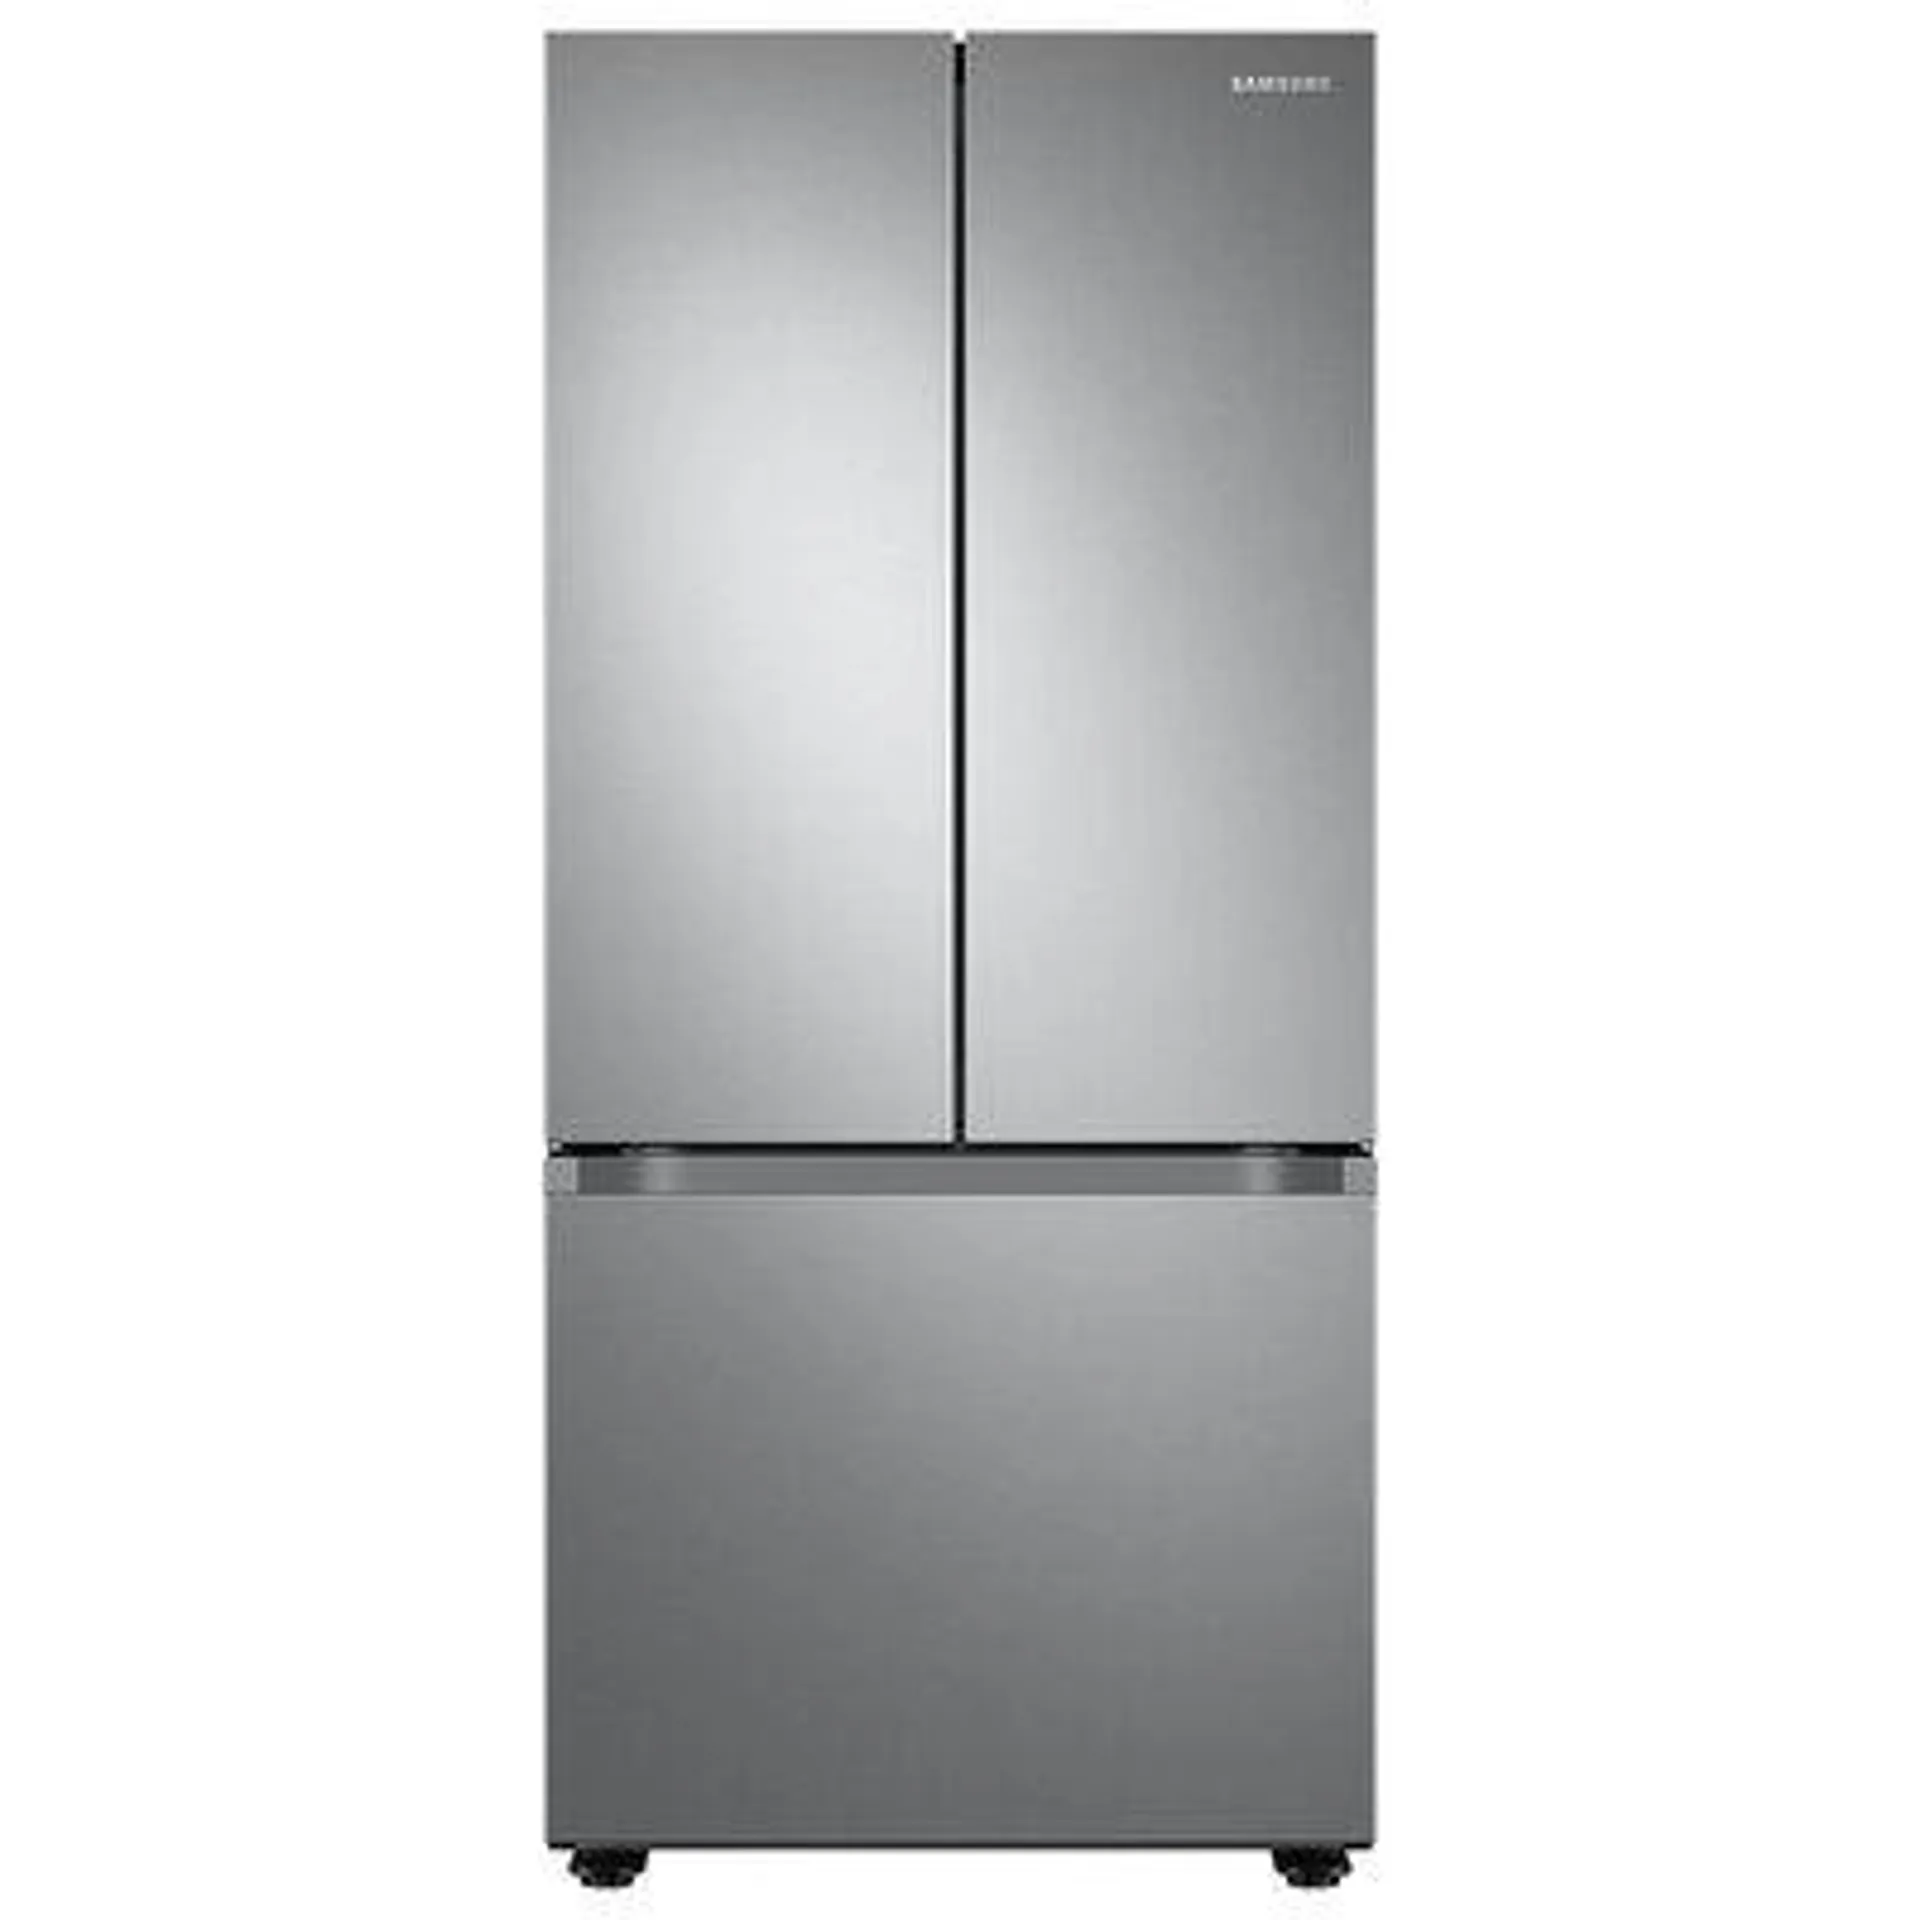 Samsung 30 in. 22.0 cu. ft. Smart French Door Refrigerator with Ice Maker - Stainless Steel